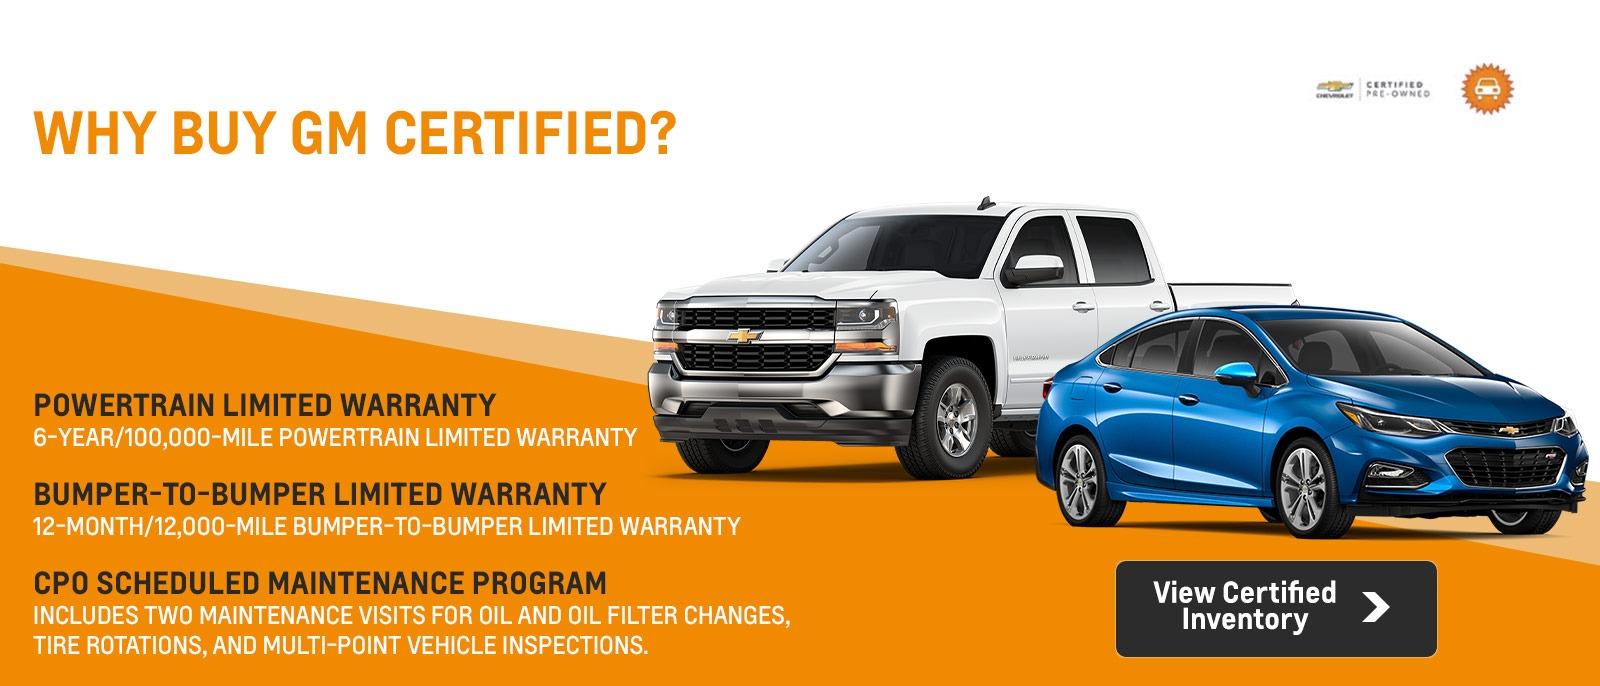 Why Buy GM Certified